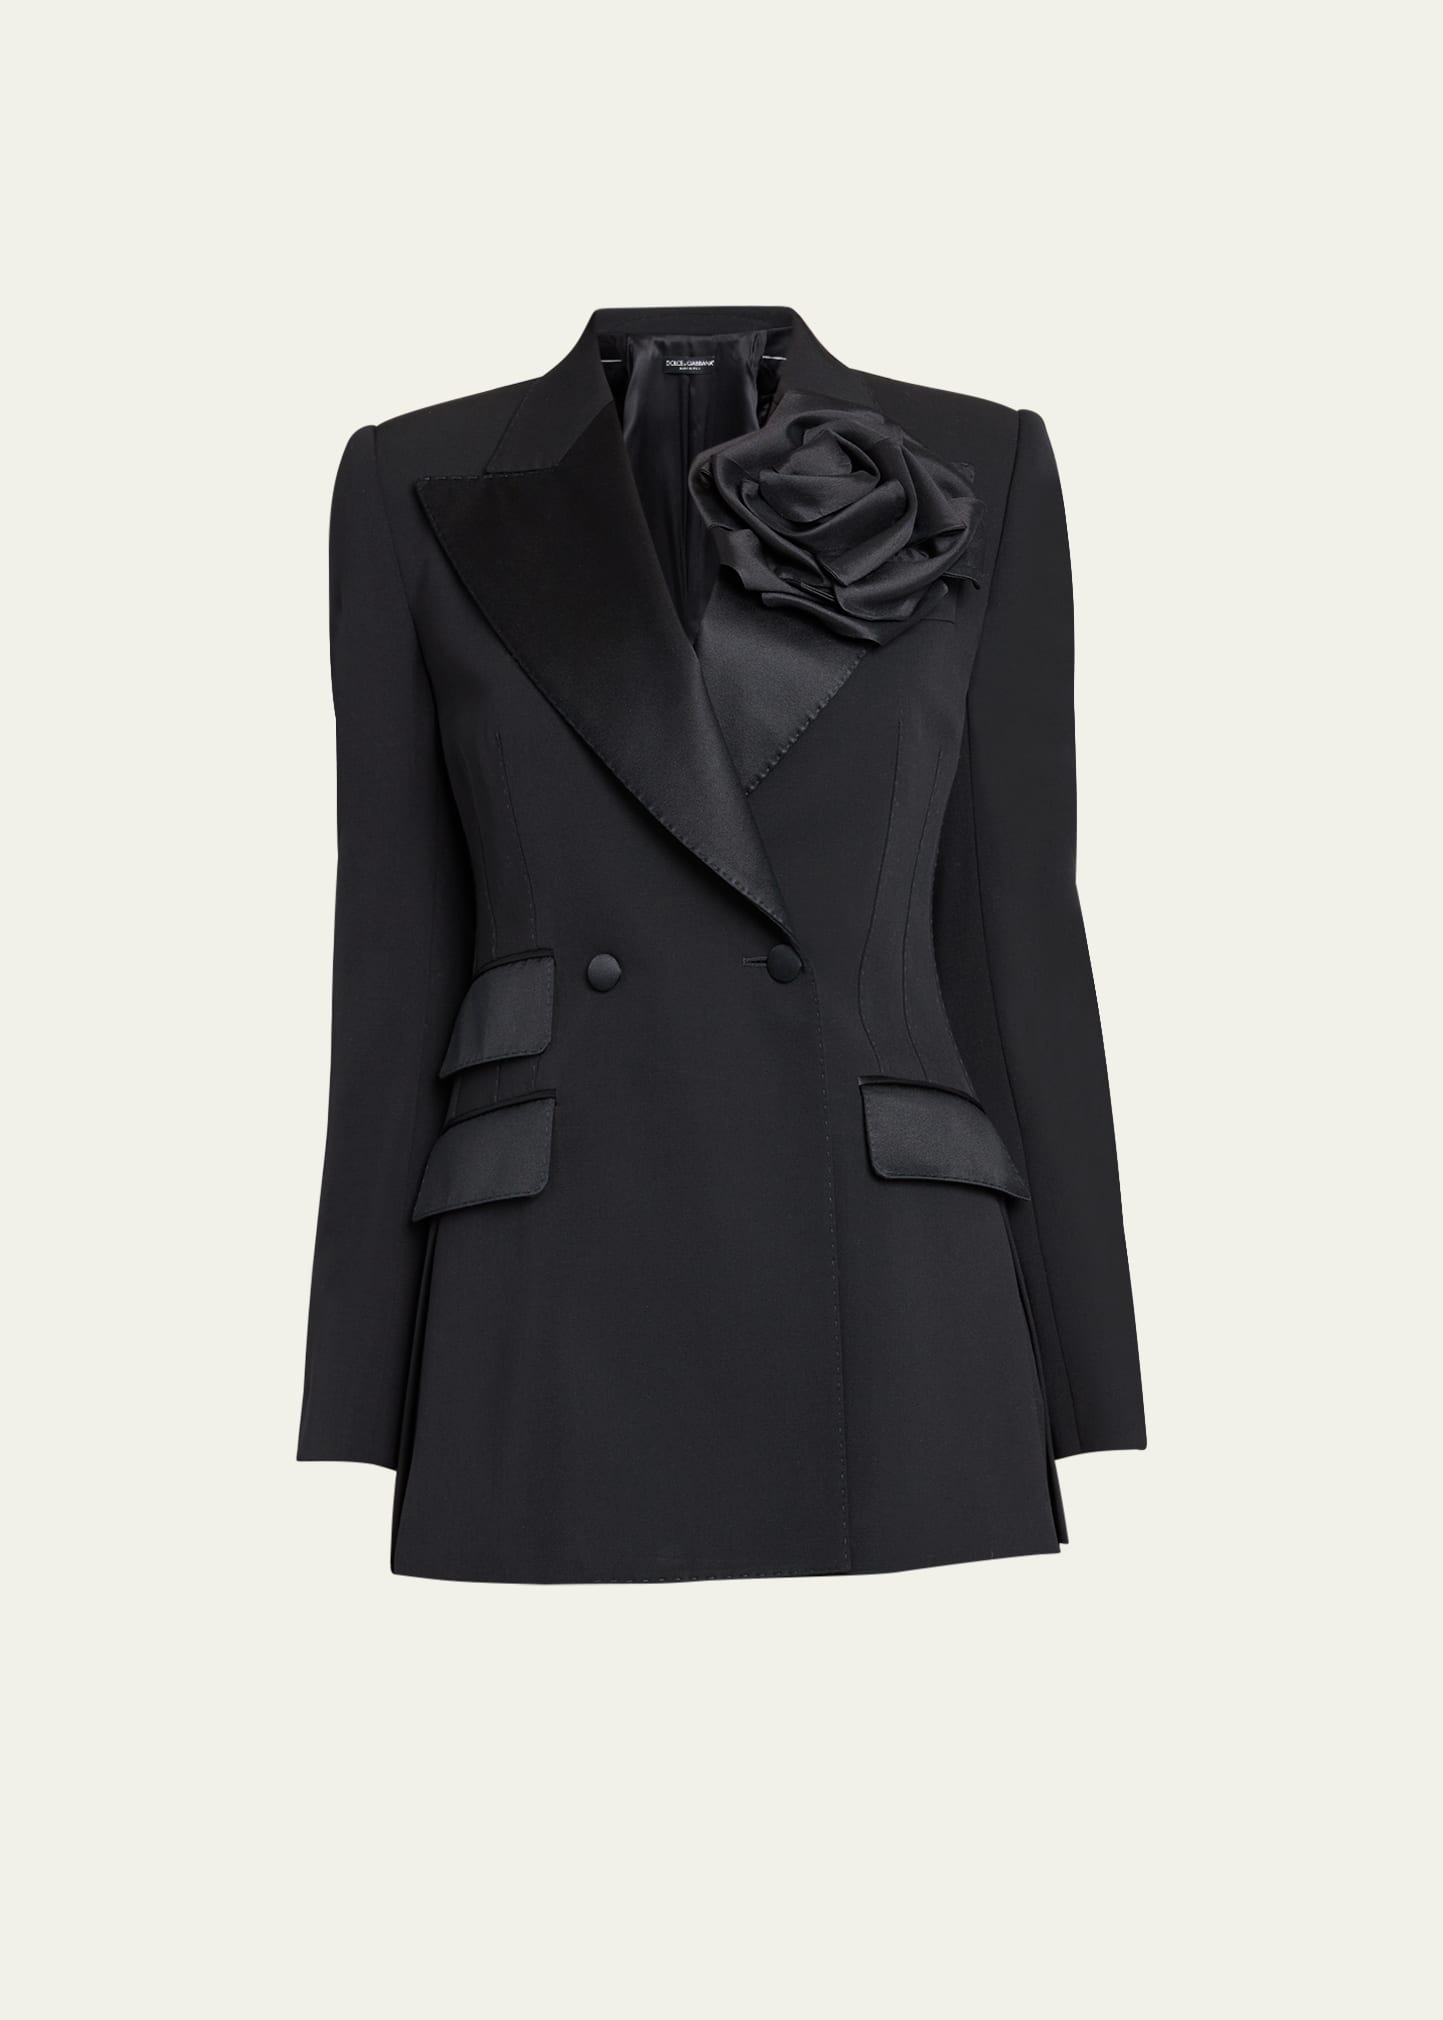 Wool Tuxedo Jacket with Floral Applique Detail